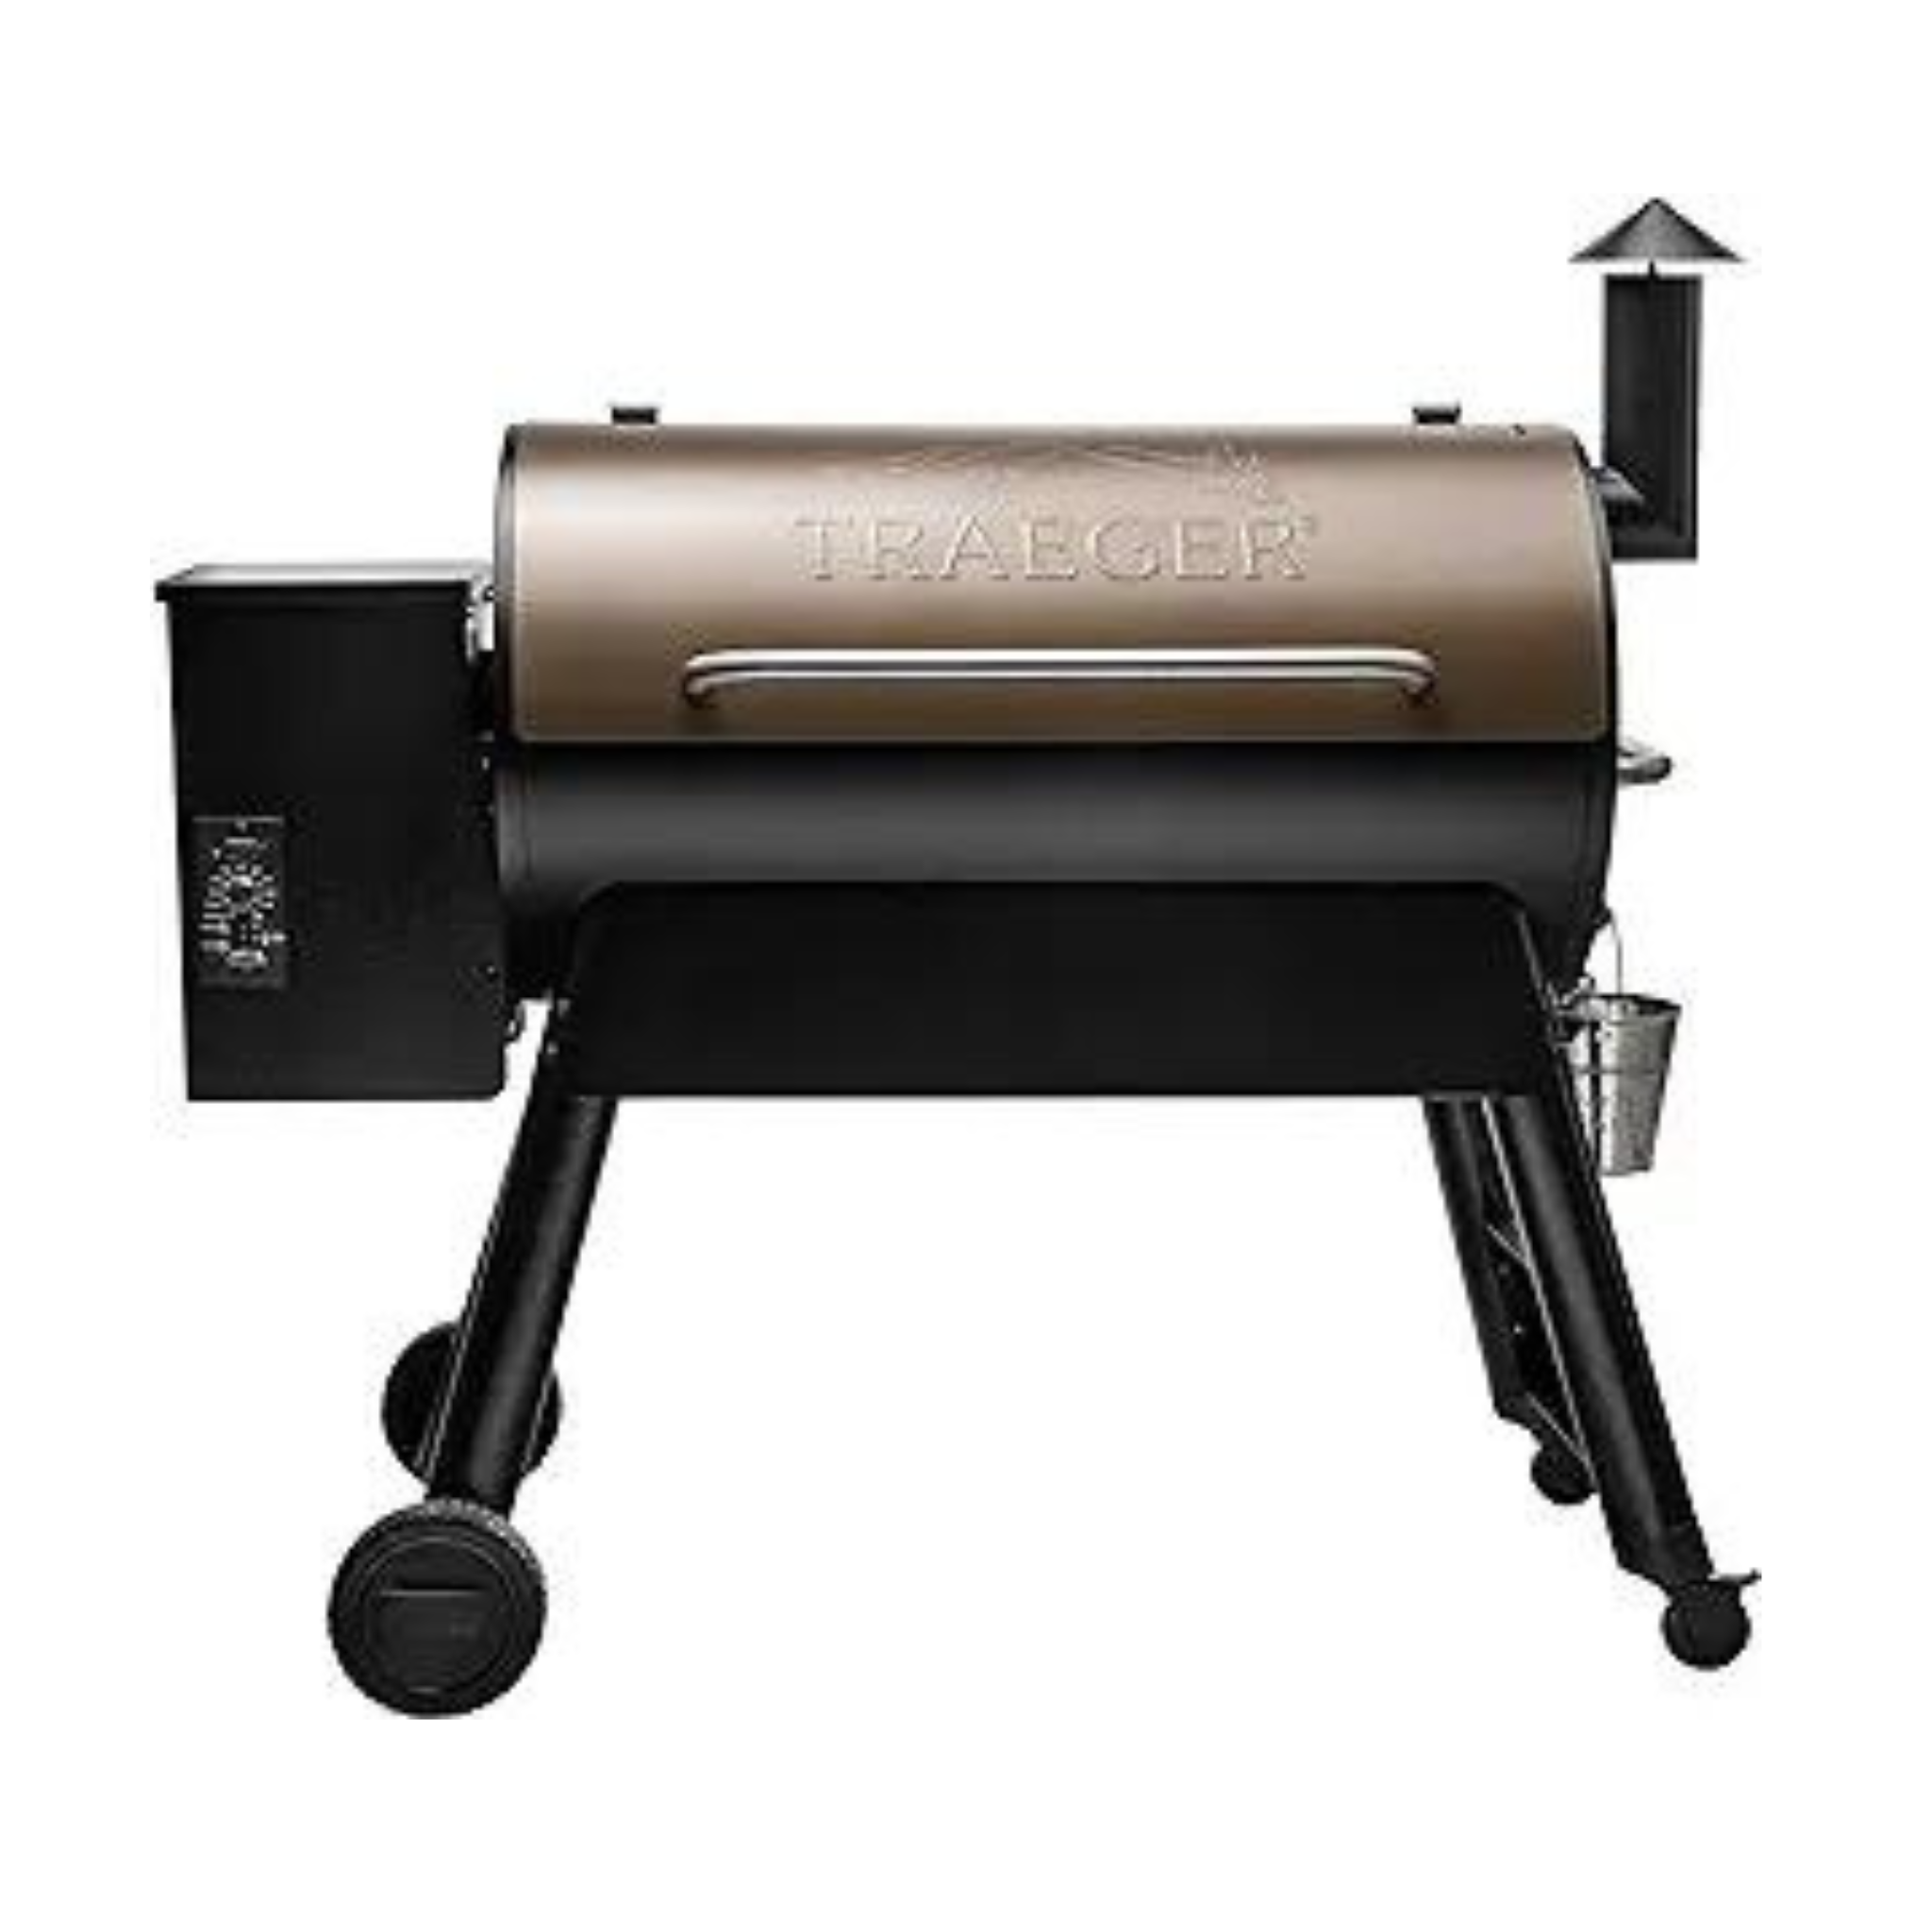 Shopping DealsAmazon Traeger Grills Pro 34 Electric Wood Pellet Grill And Smoker